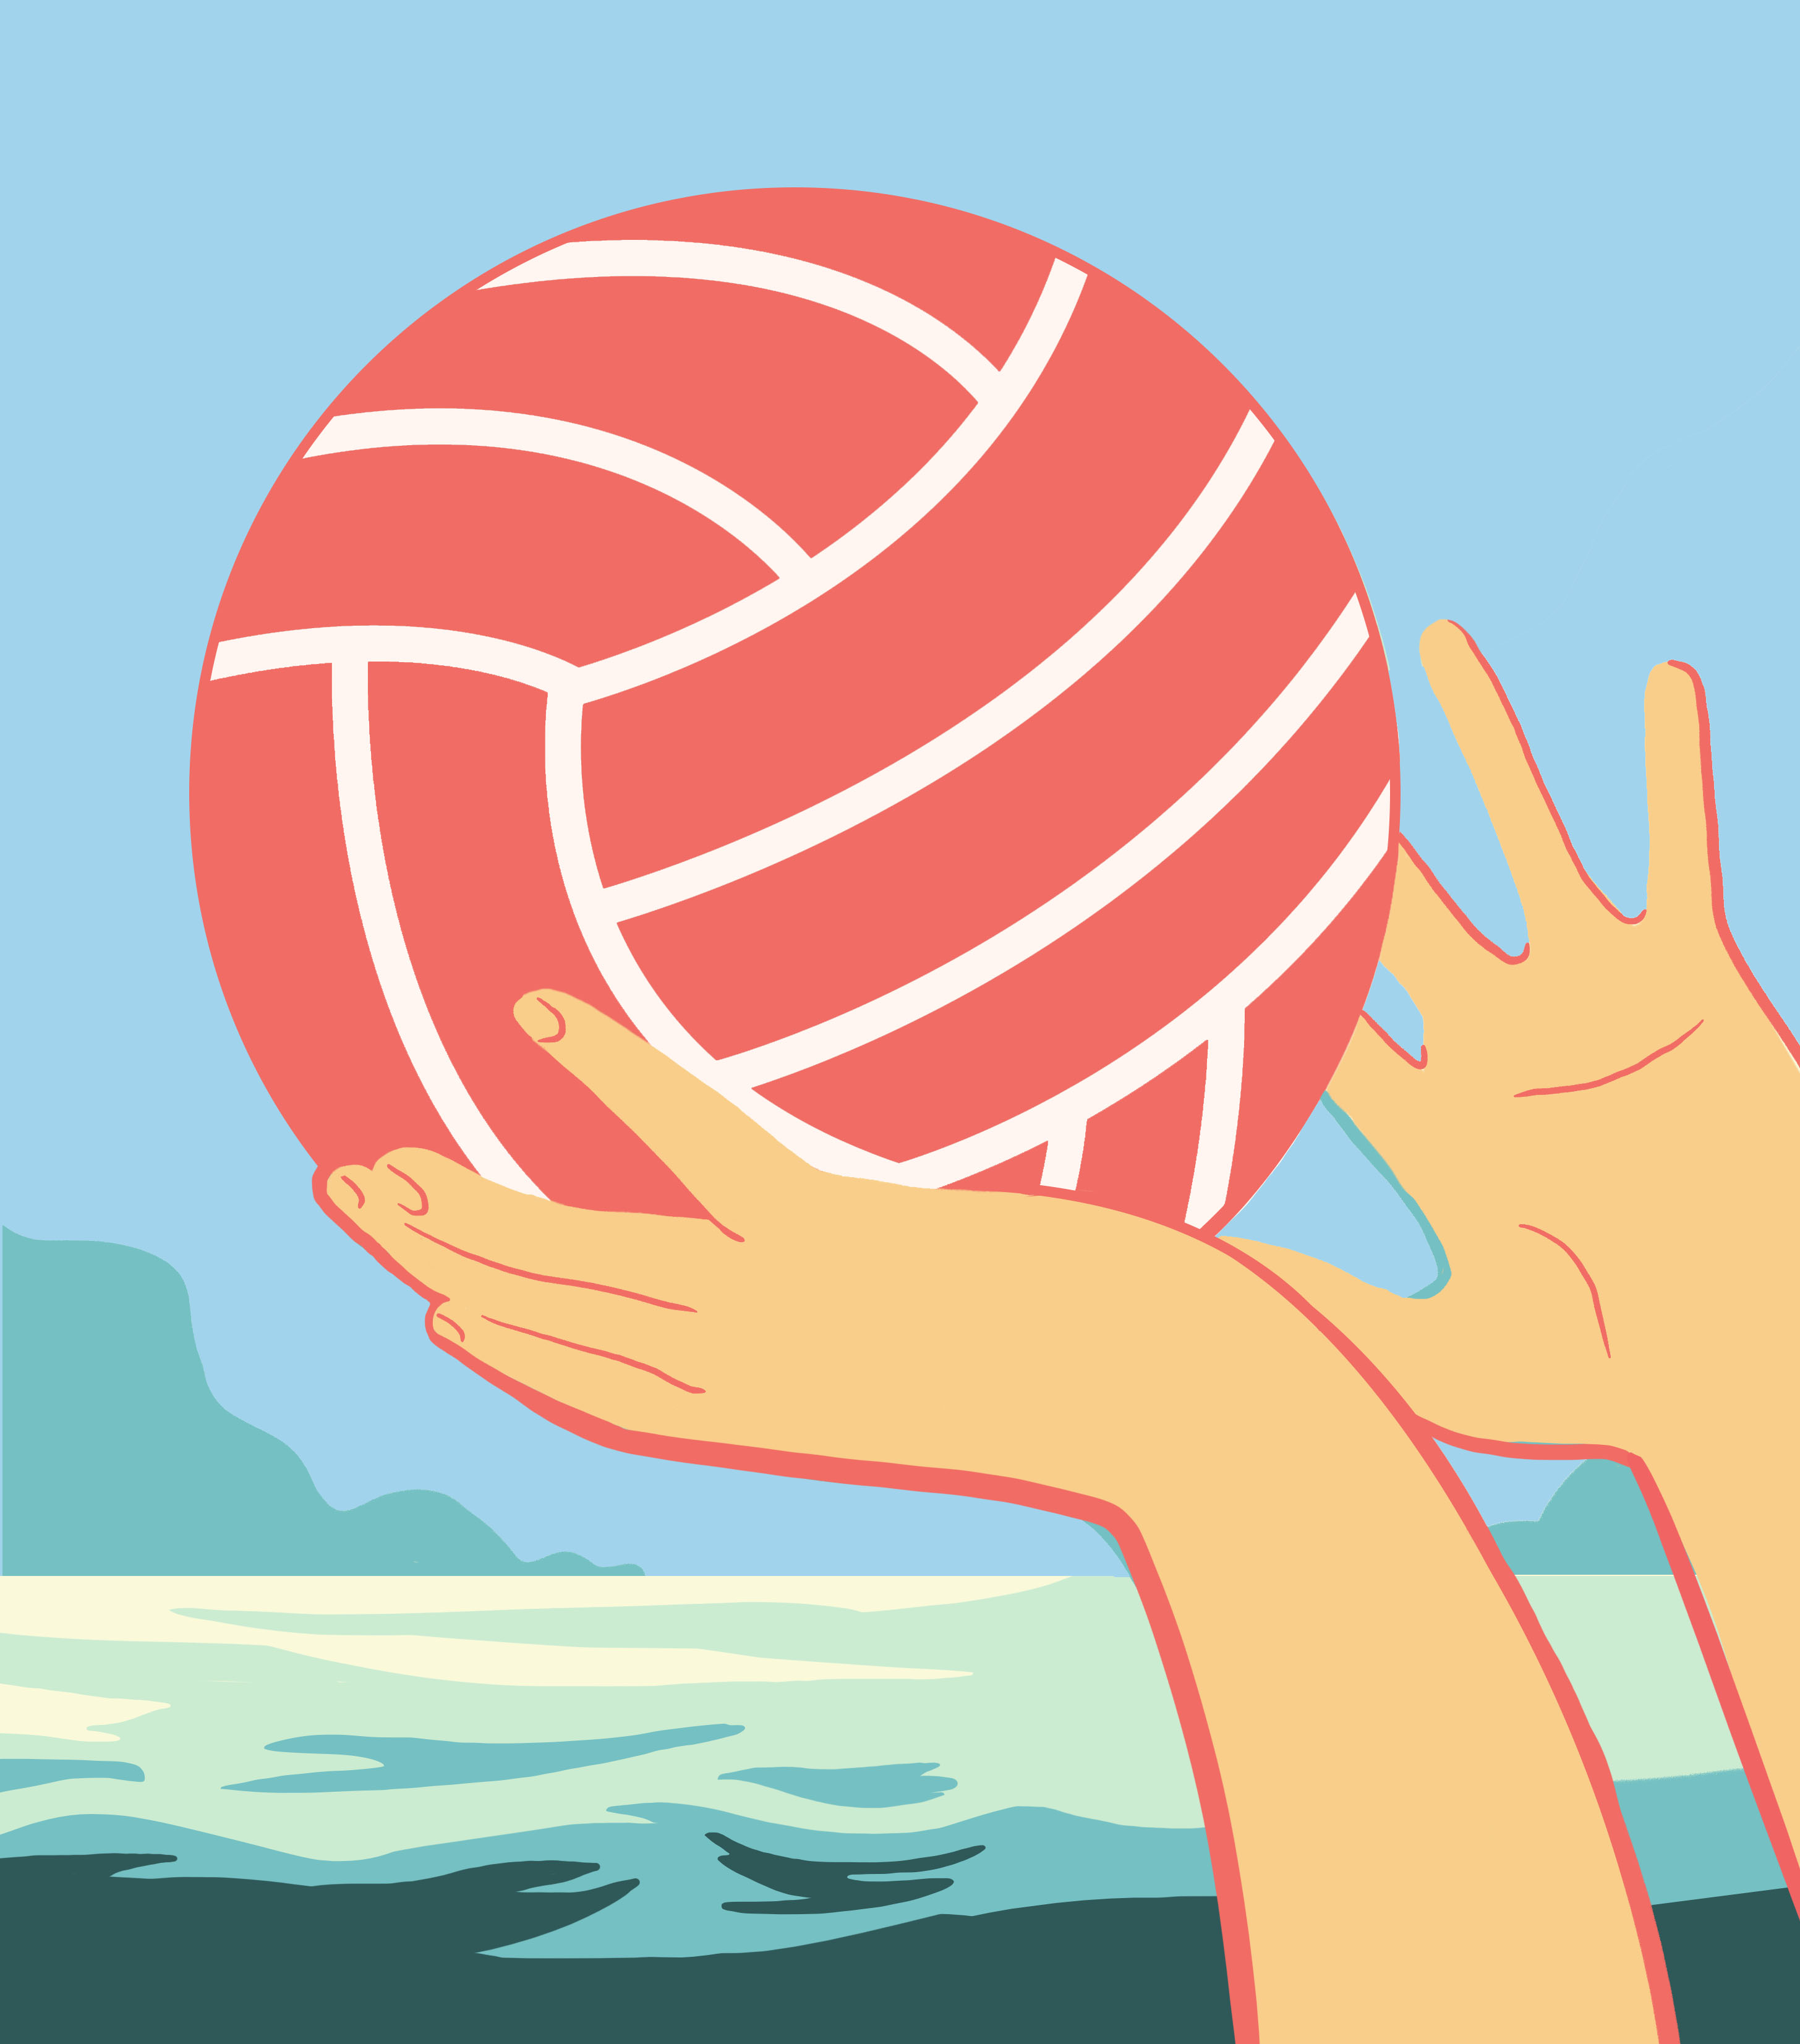 illustration of hands catching a netball